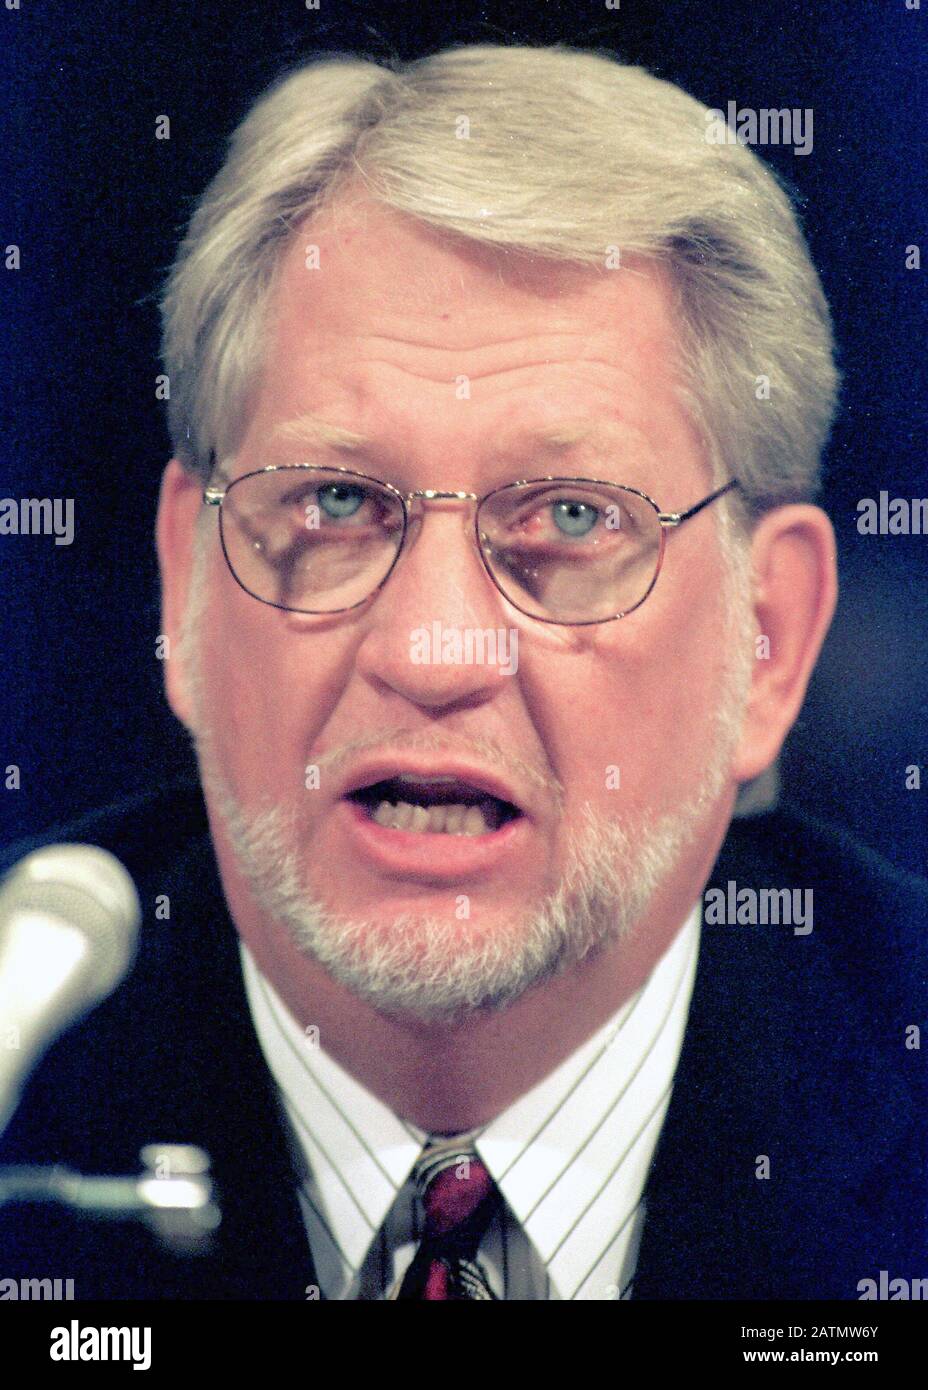 Bernard J. Ebbers, President and CEO, MCIWorldCom testifies at a hearing before the United States Senate Committee on the Judiciary on 'The MCI WorldCom/Sprint Merger -- A Competition Review' on 4 November, 1999 in Washington, DC.Credit: Ron Sachs/CNP | usage worldwide Stock Photo